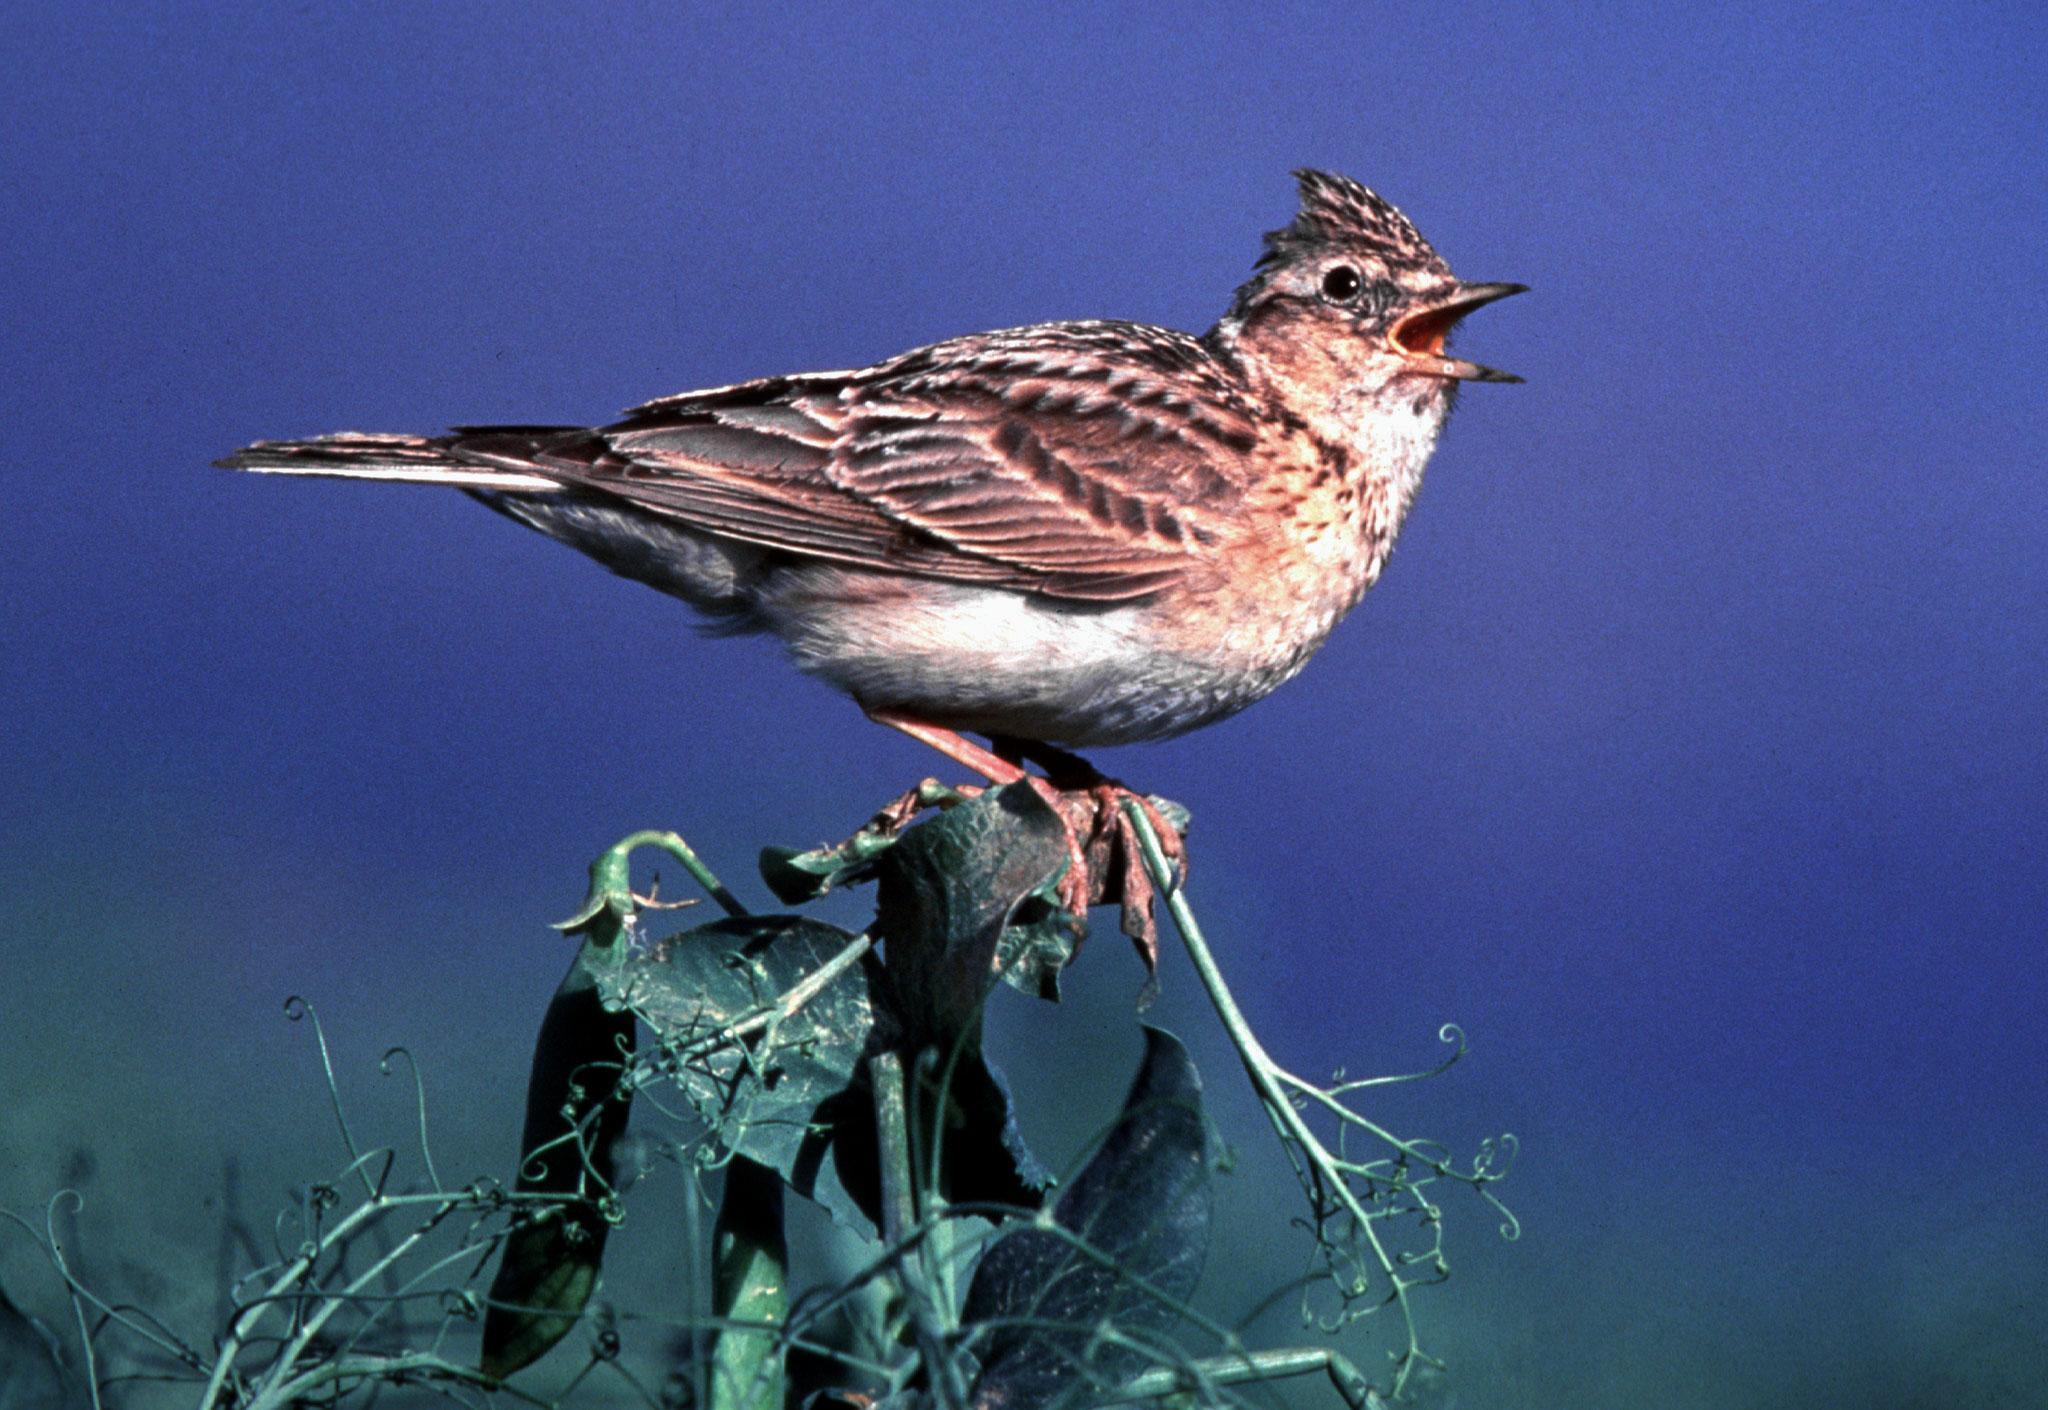 Skylarks are among the many species at risk from diminishing food and habitats, as well as pesticides thanks to changes in farming